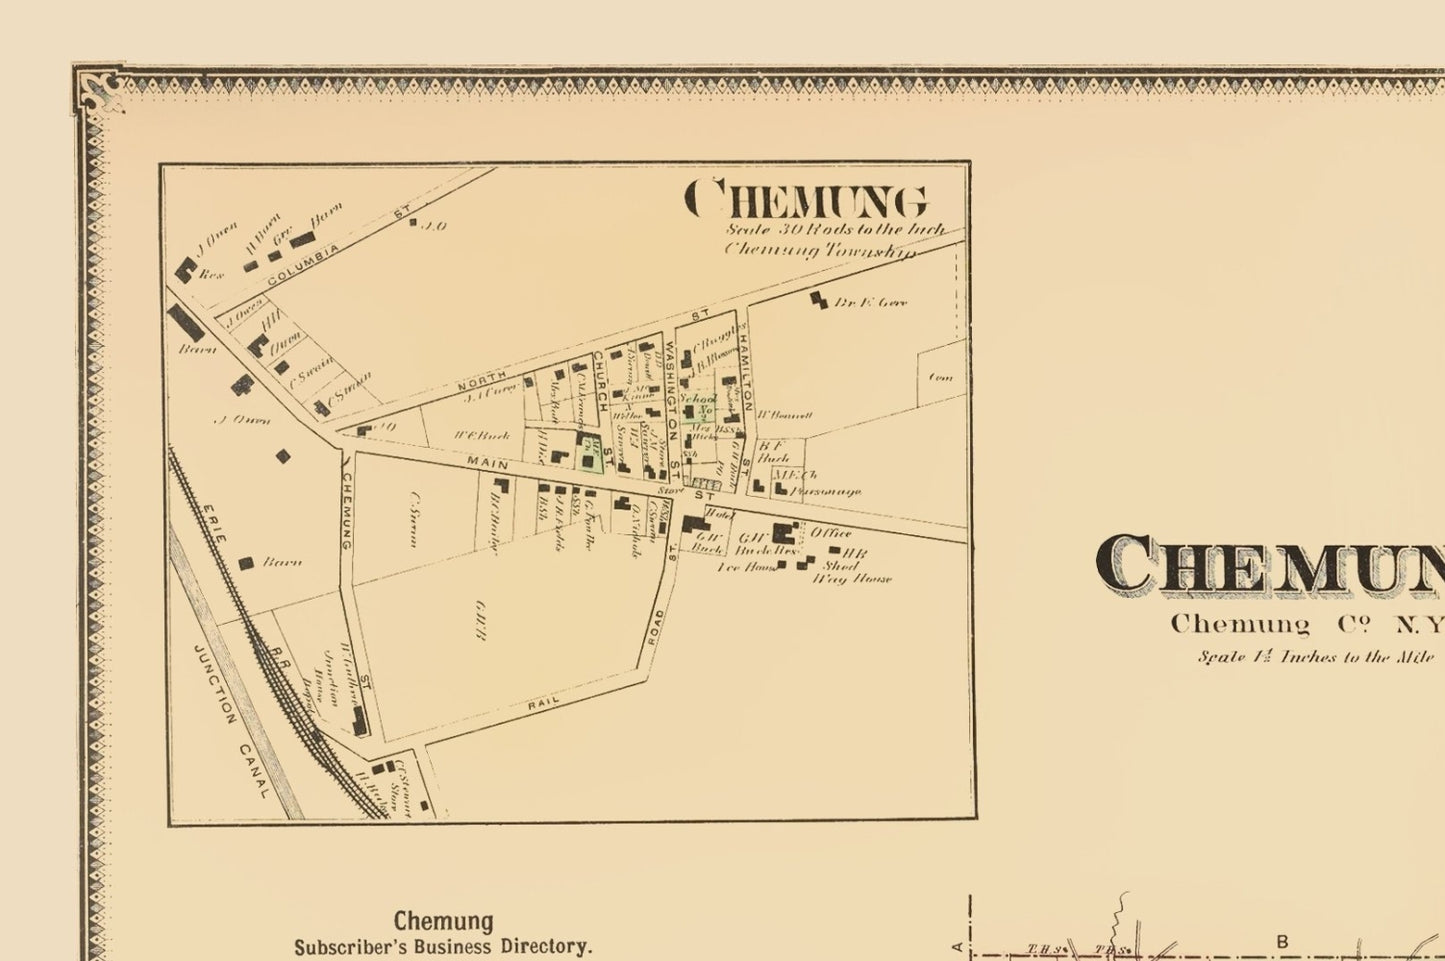 Historic County Map - Chemung County New York - Beers 1869 - 23 x 34.59 - Vintage Wall Art